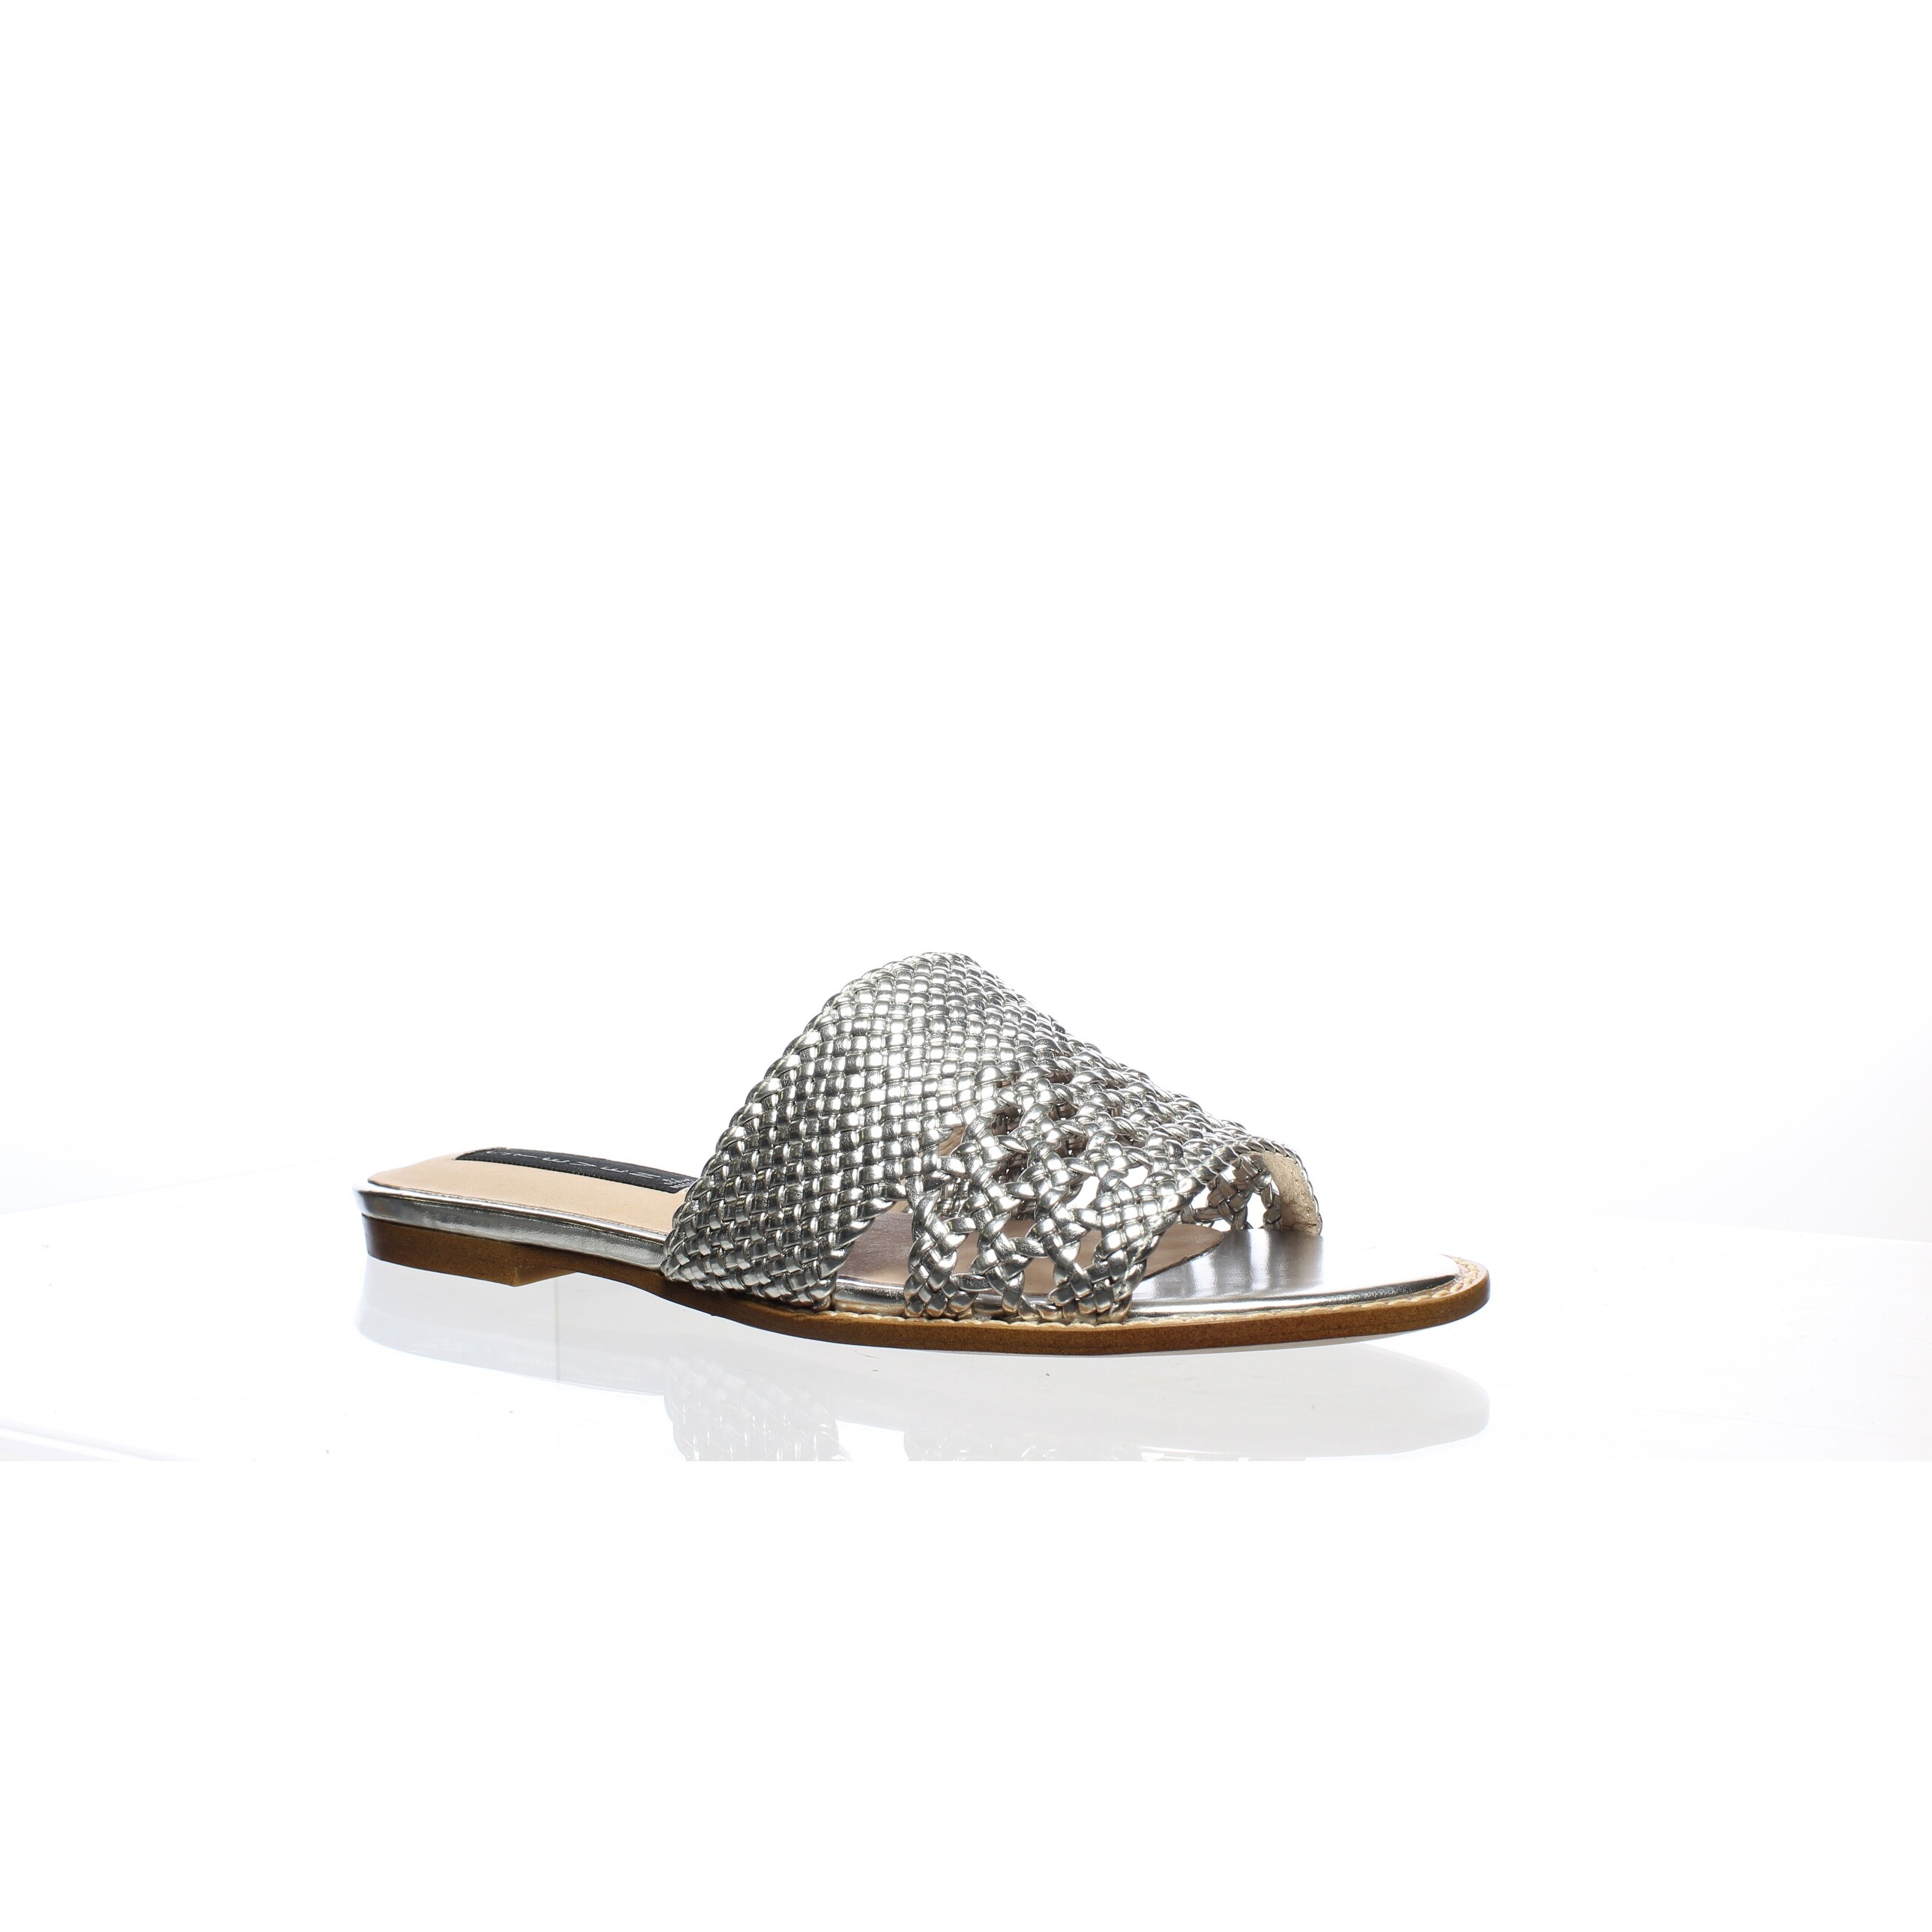 silver sandals size 7